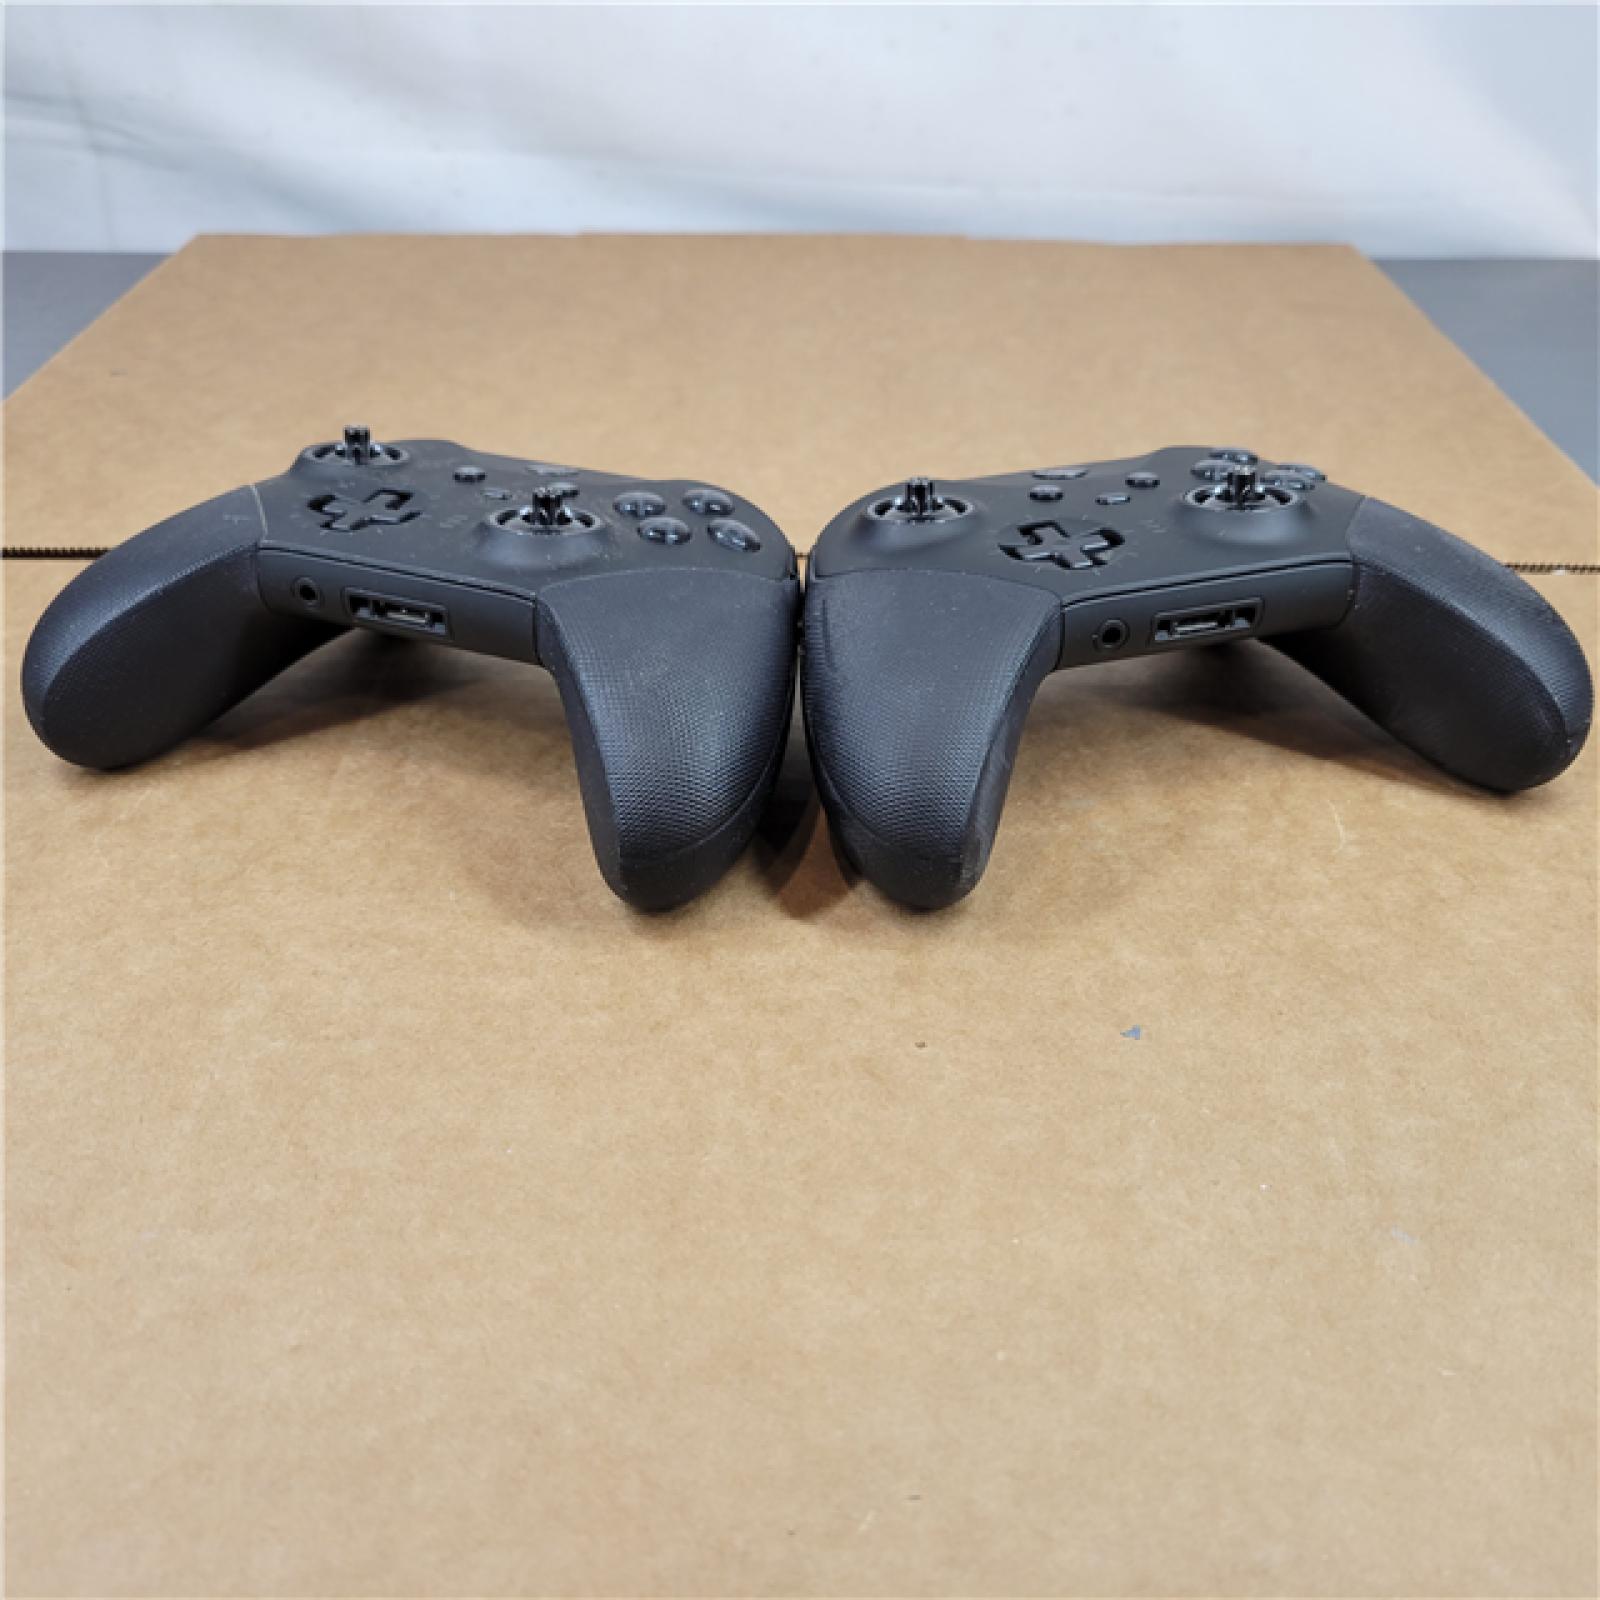 AS-IS Microsoft Wireless Elite Controller: Black V2 for Xbox One (Lot of 2)